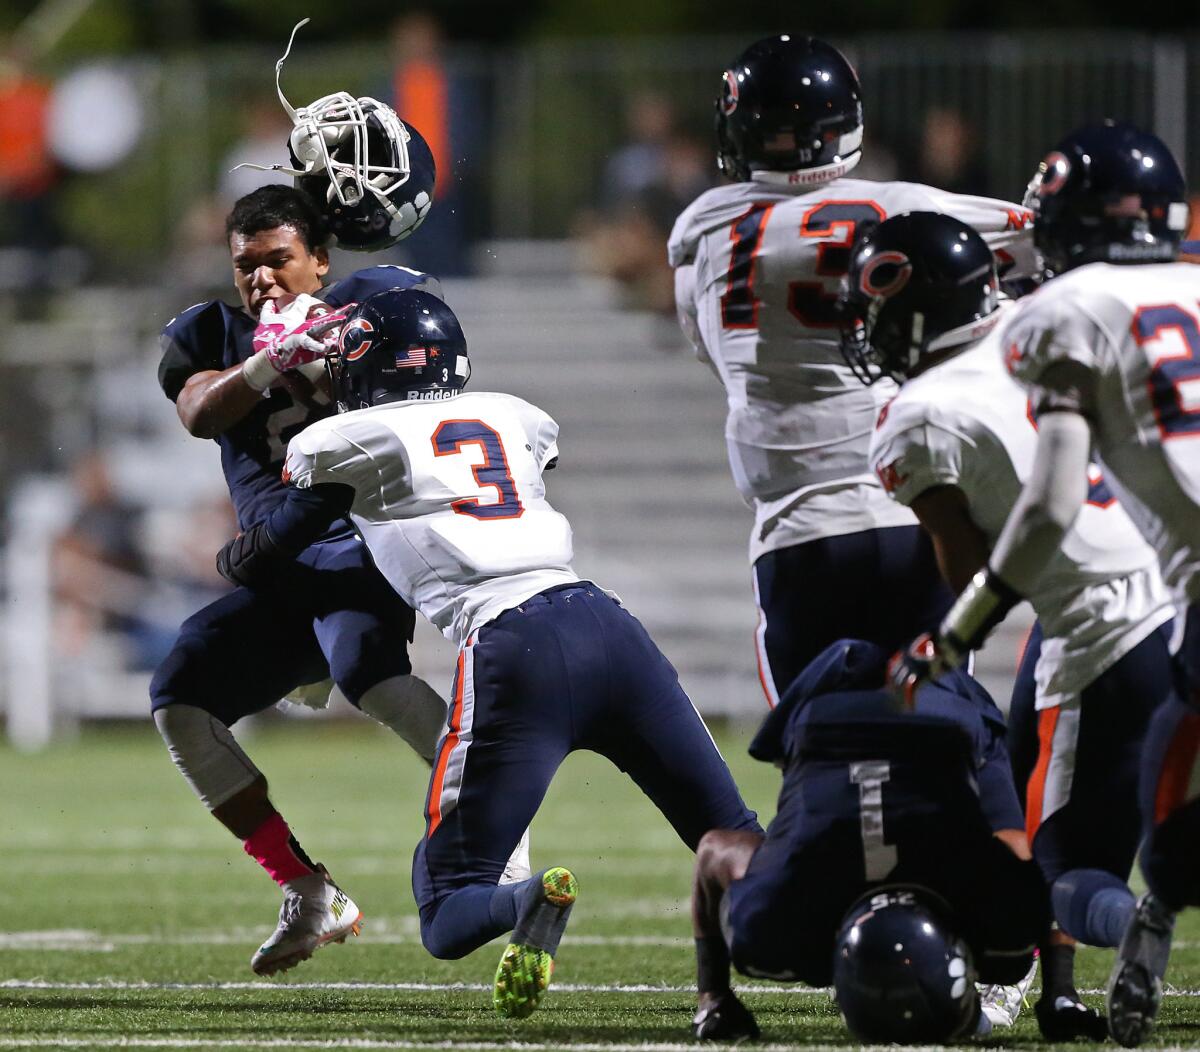 Chaminade defensive back Diamond Harrell knocks the helmet off Loyola quarterback Drake Beasley Jr. in the second quarter. Harrell was called for a personal foul penalty.